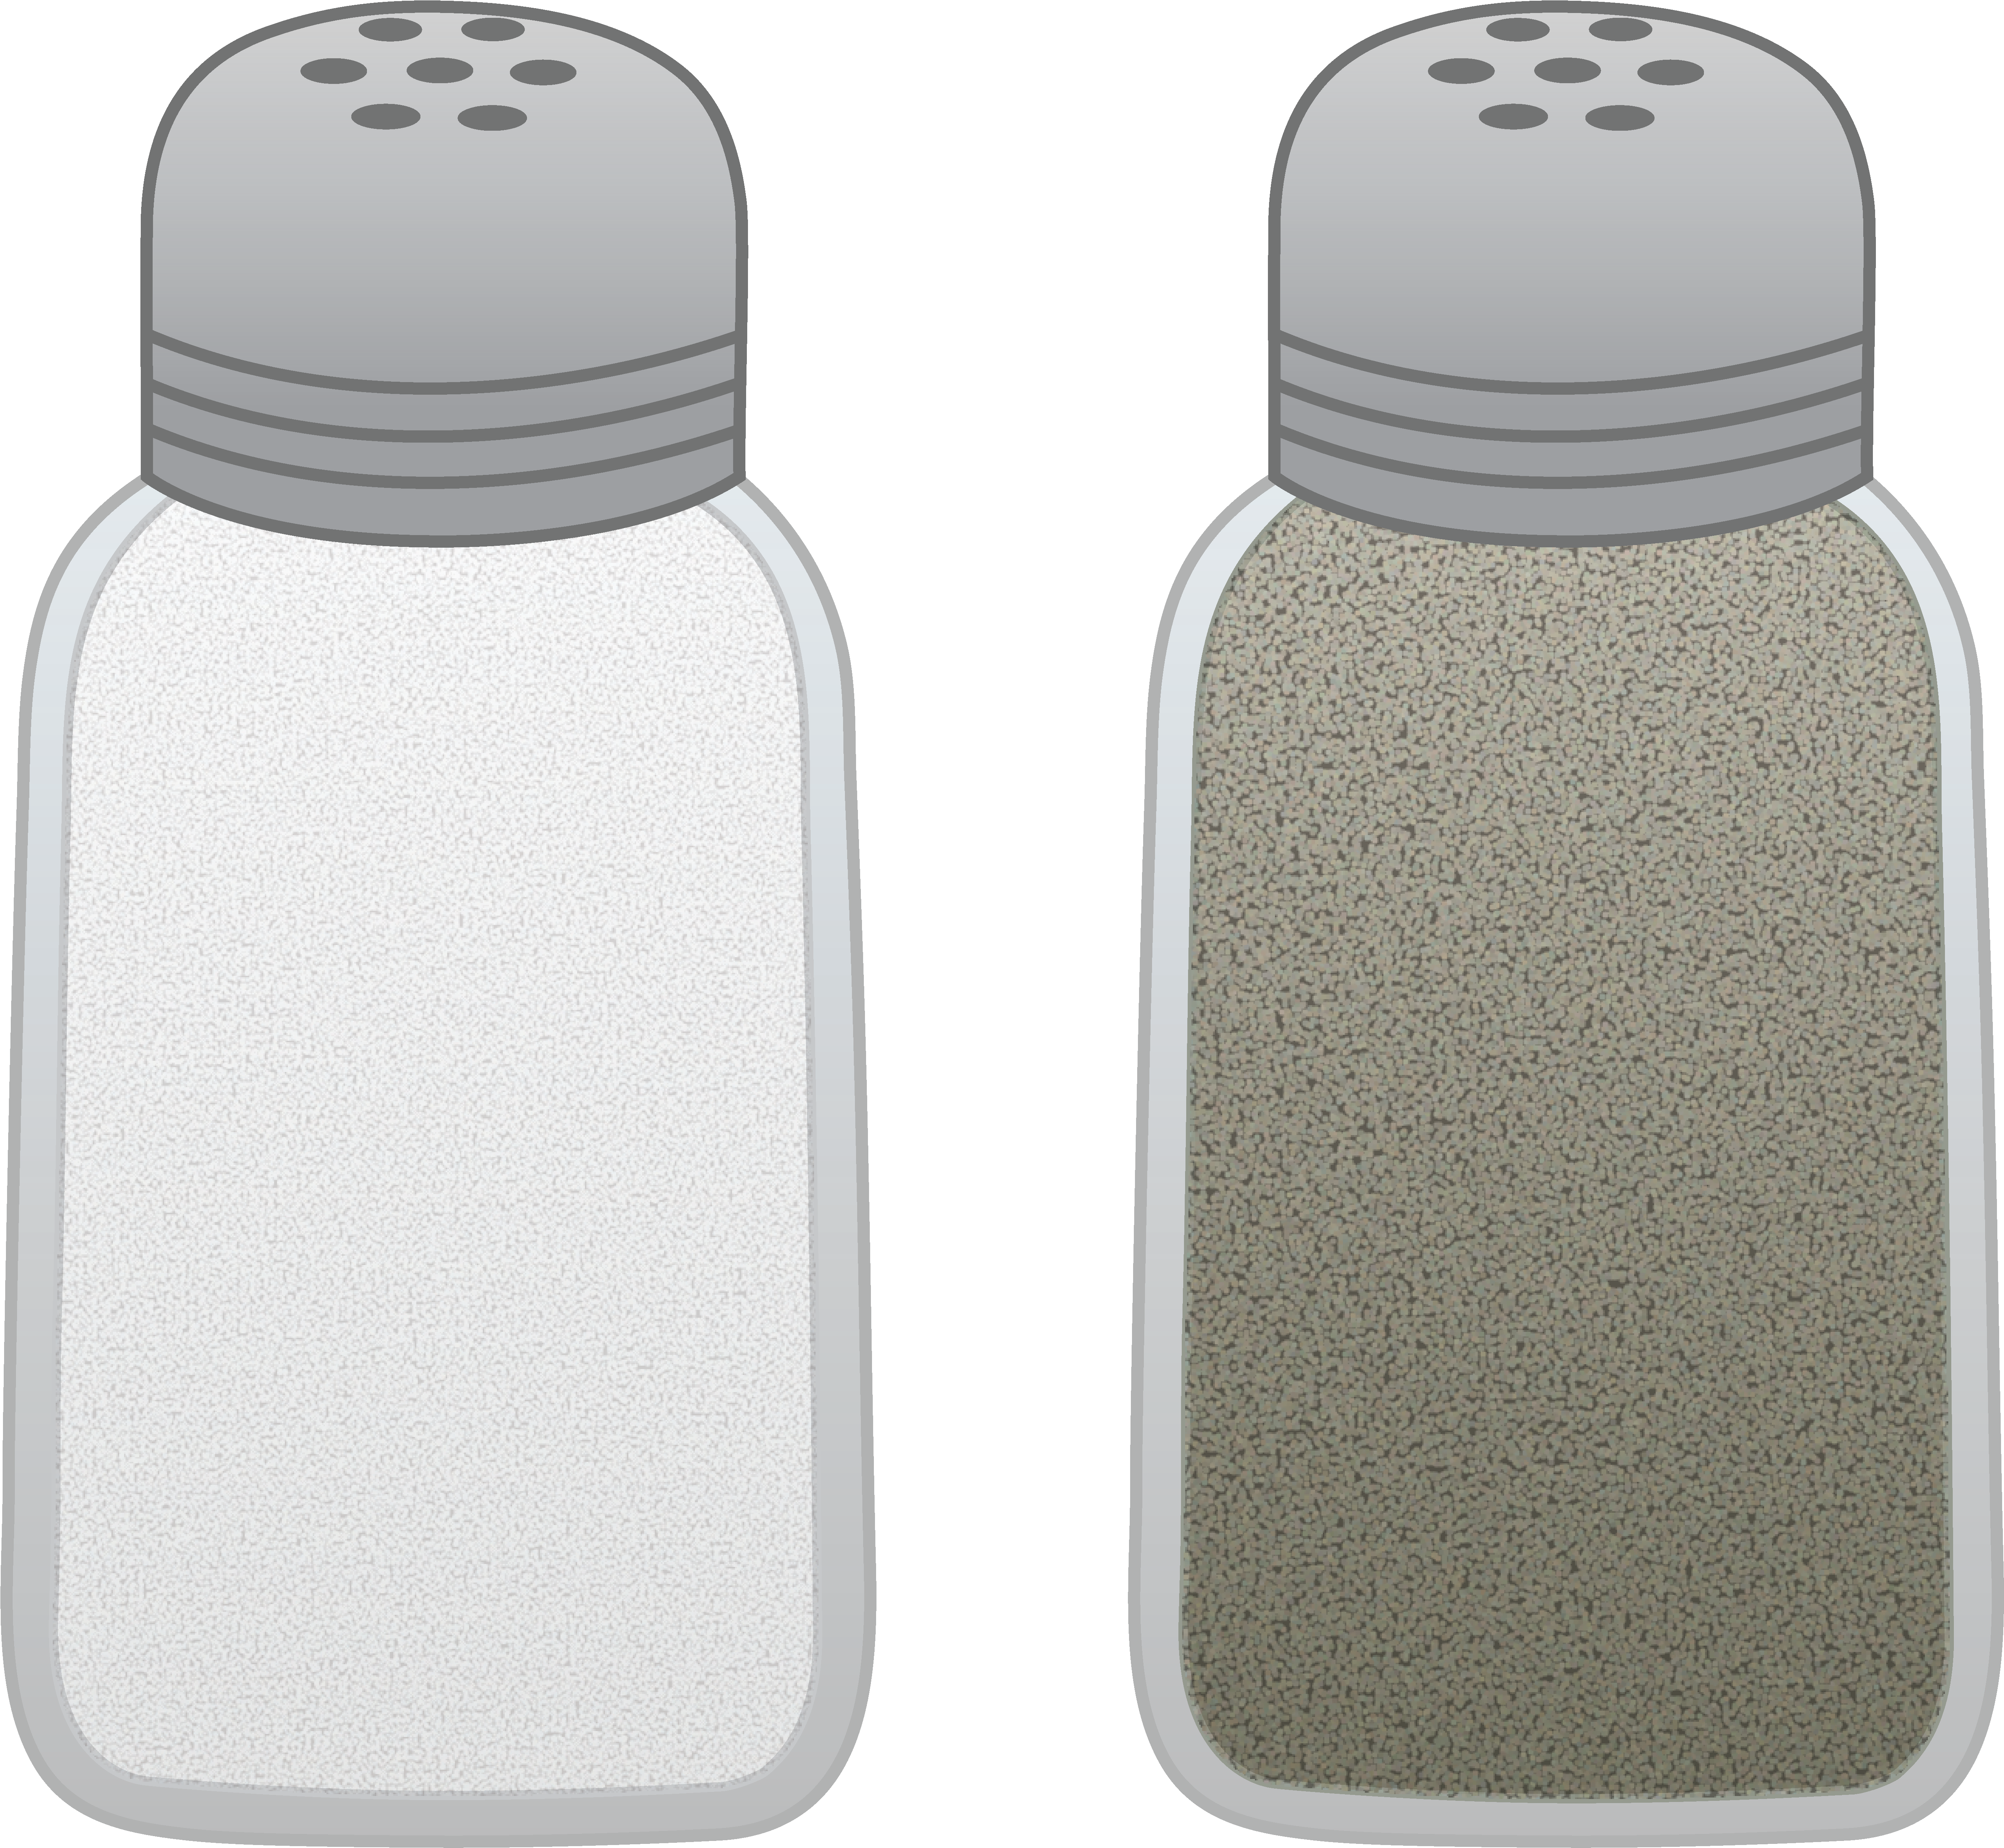 Salt And Pepper Shakers - Salt And Pepper Shaker Clipart - Png Download (5413x4998), Png Download